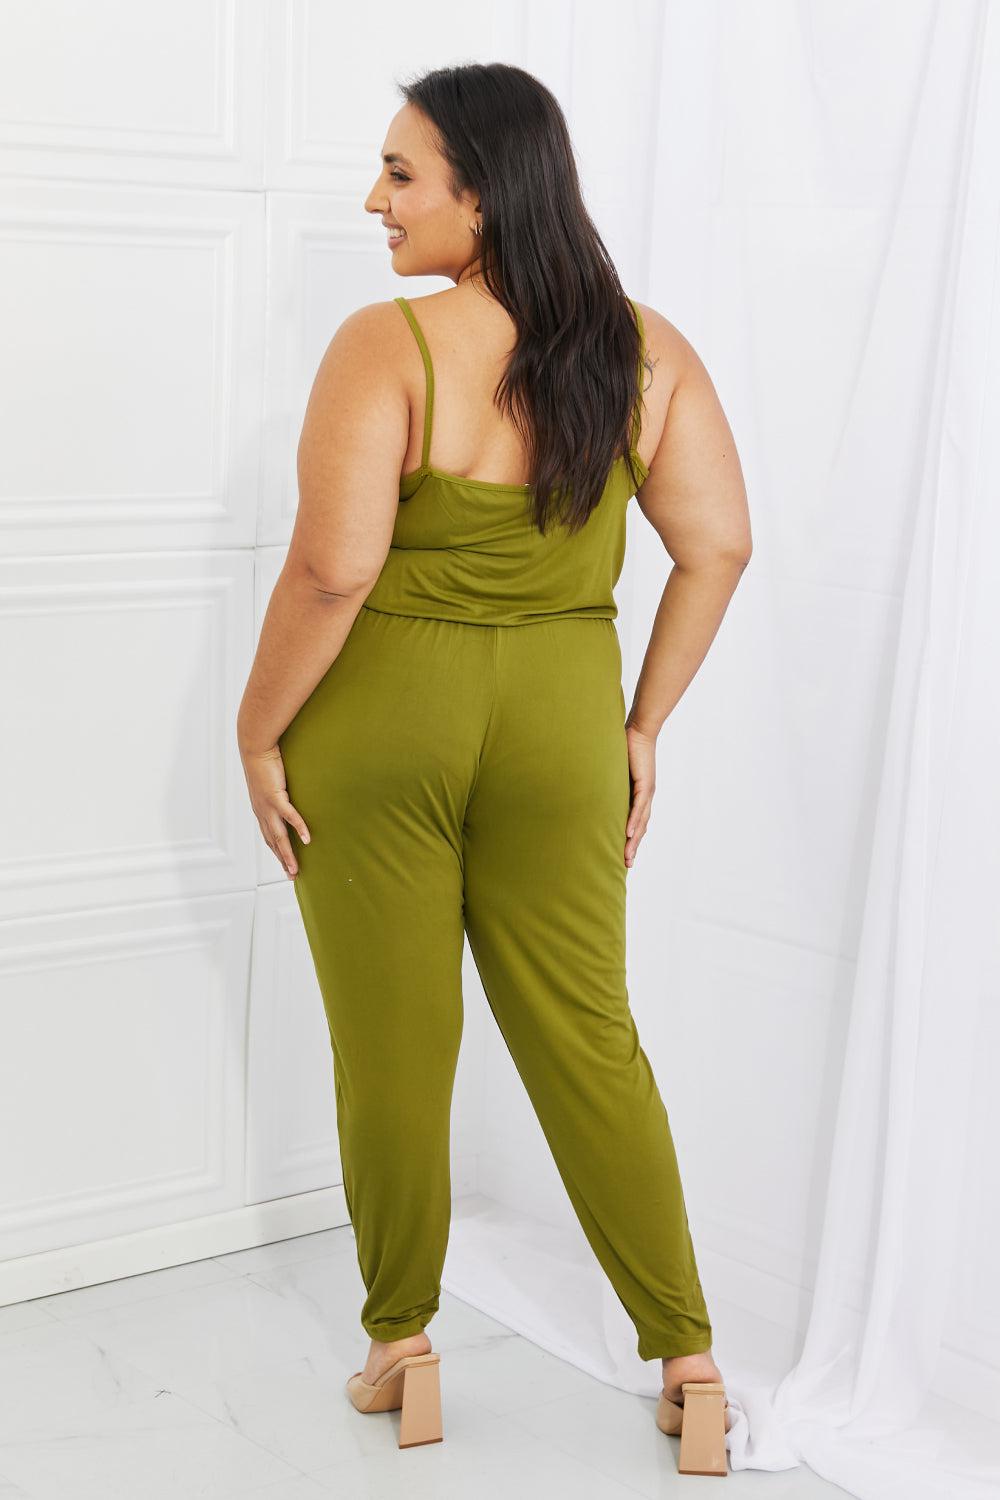 Capella Comfy Casual Full Size Solid Elastic Waistband Jumpsuit in Chartreuse BLUE ZONE PLANET